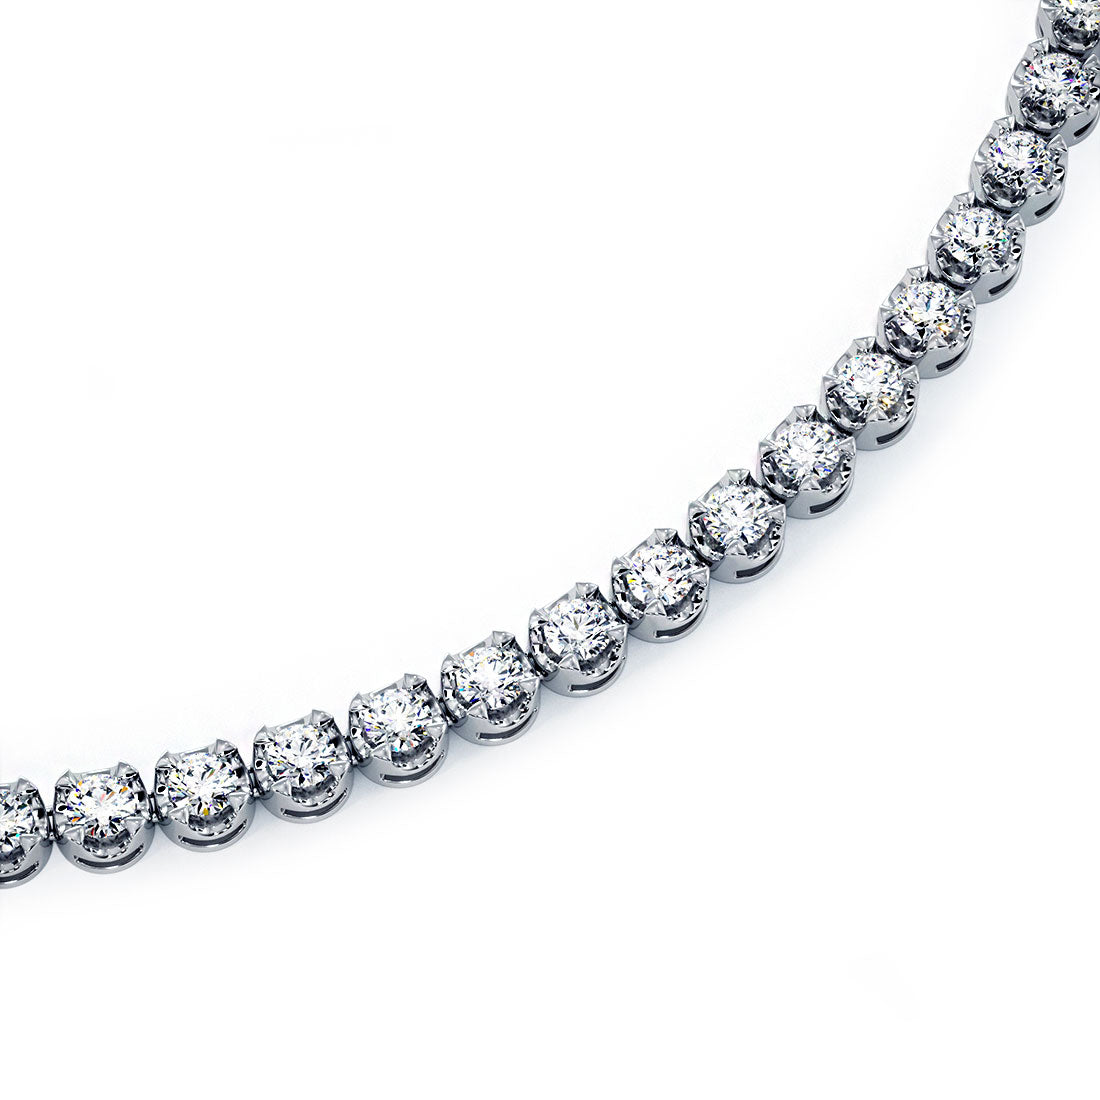 Gorgeous Natural Diamond Tennis Necklace in 14Kt White Gold - Ruby Lane